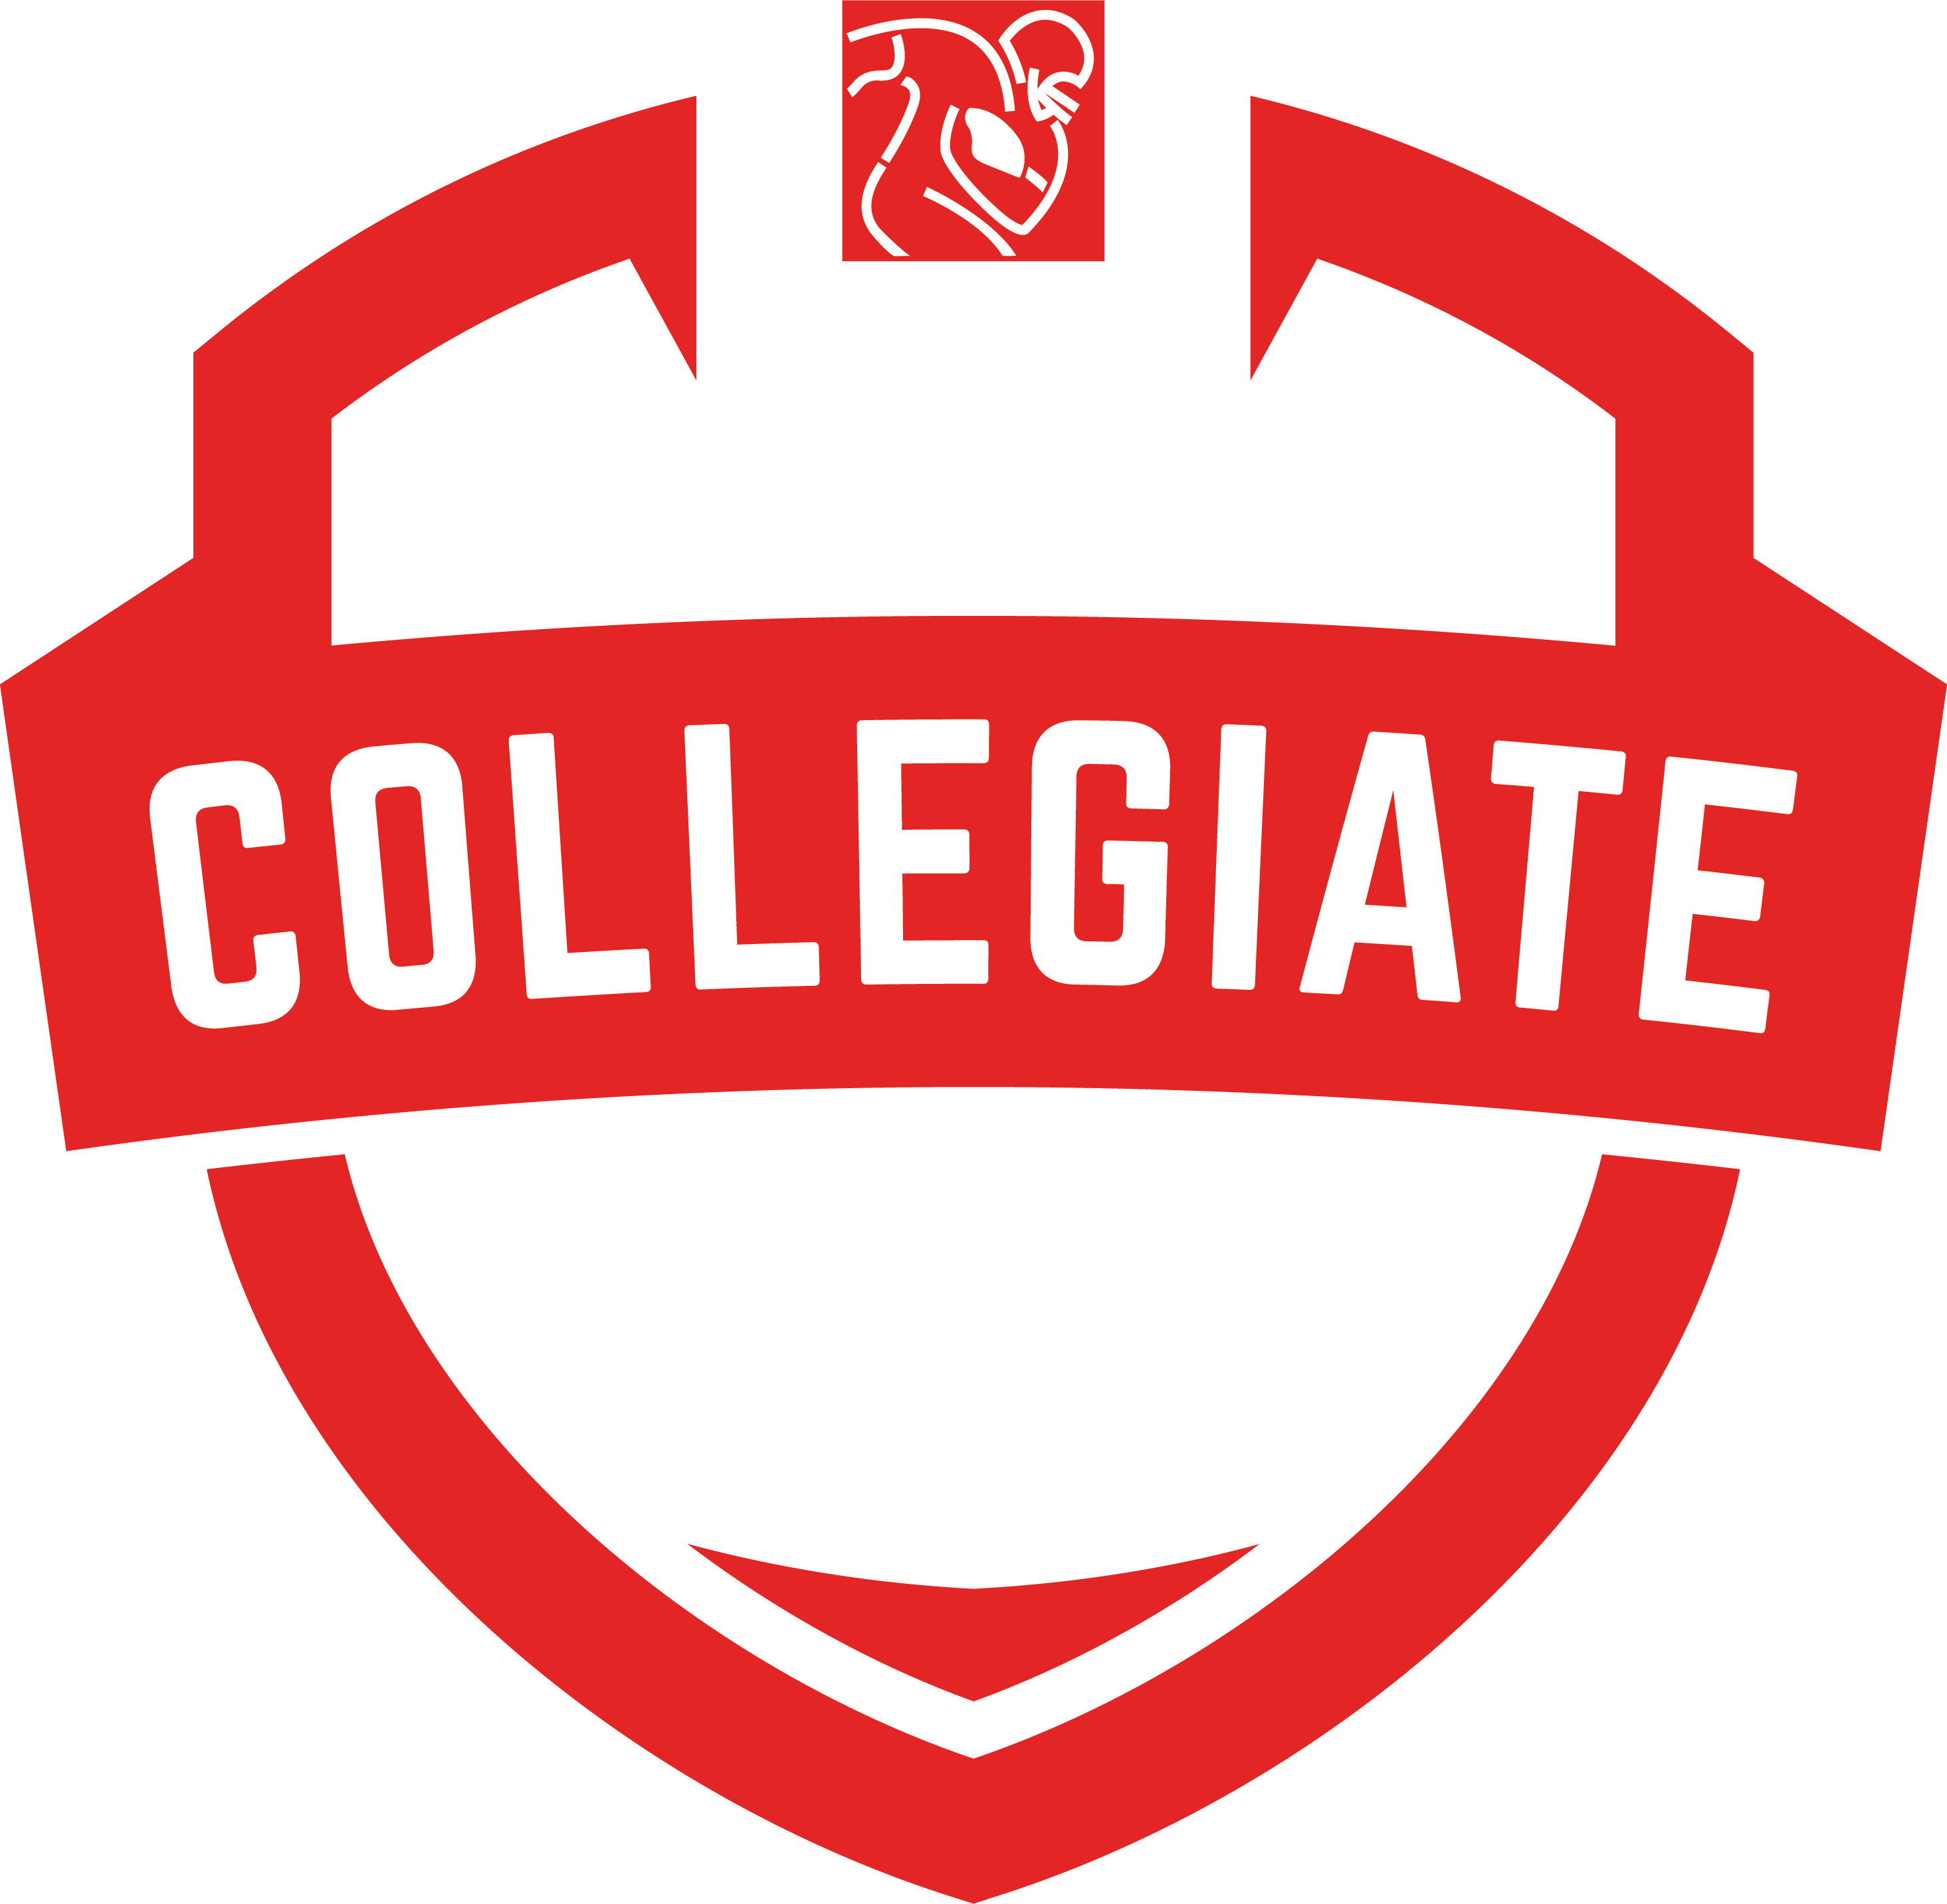 V Star College Football Logo - NFLPA Collegiate Bowl – The Premiere CFB All-Star Game